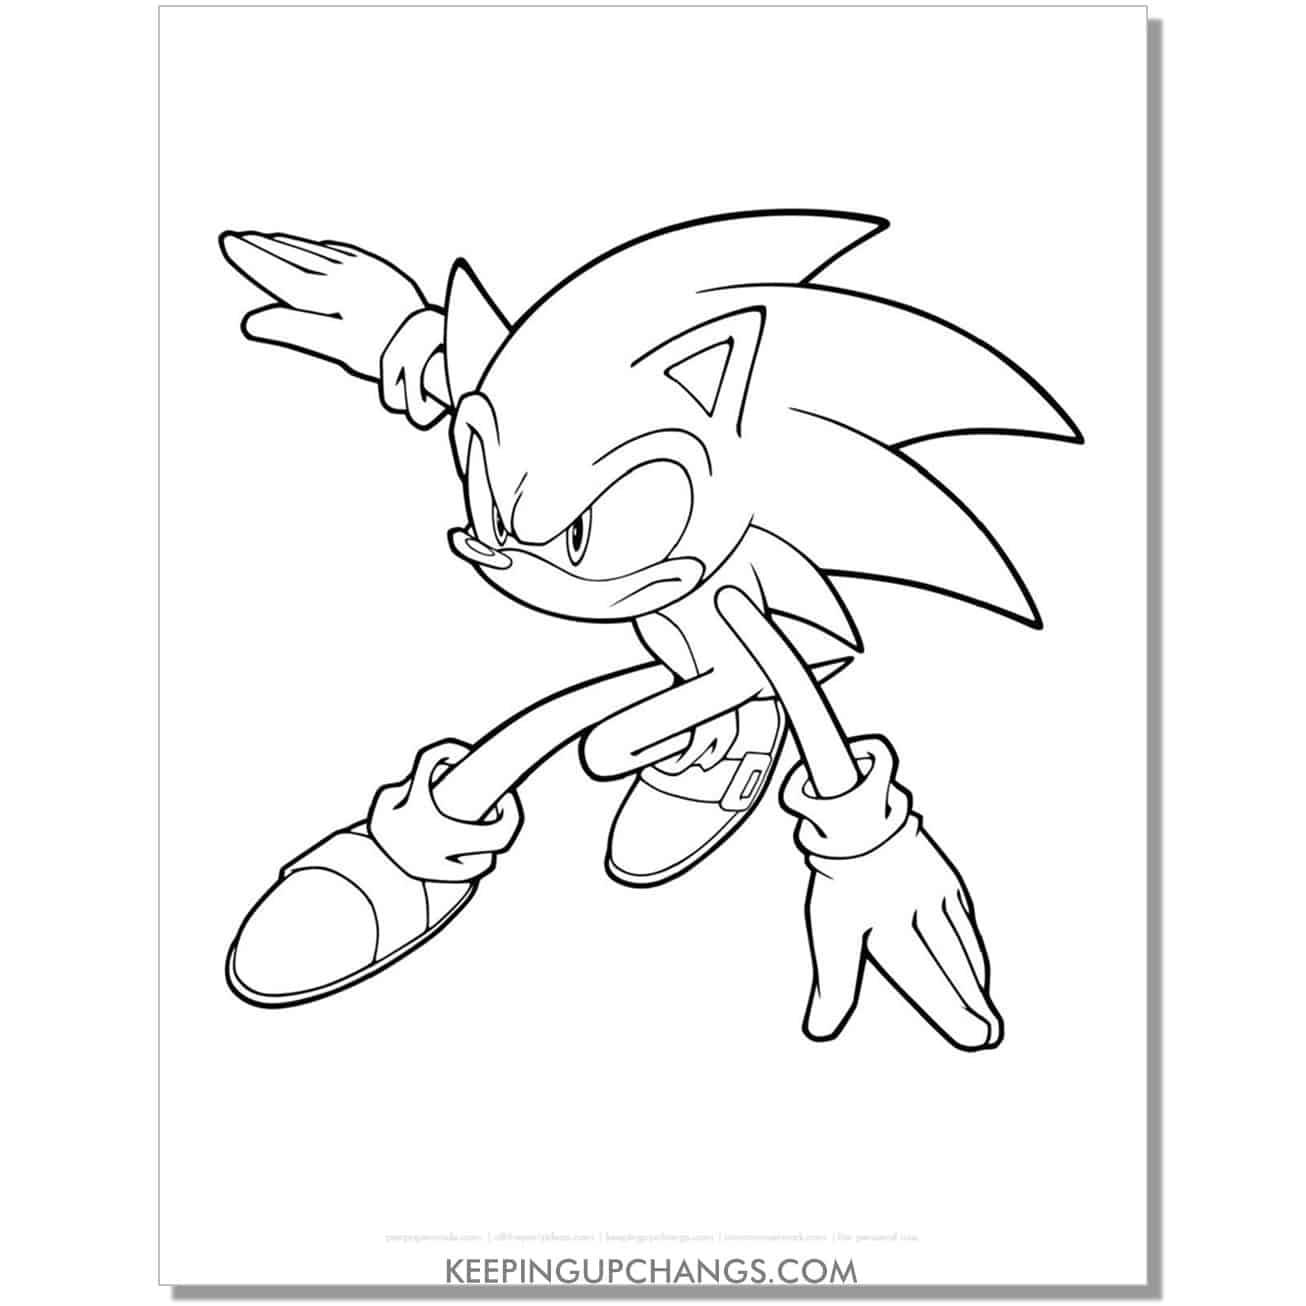 sonic running with hand on ground to make turn coloring page.